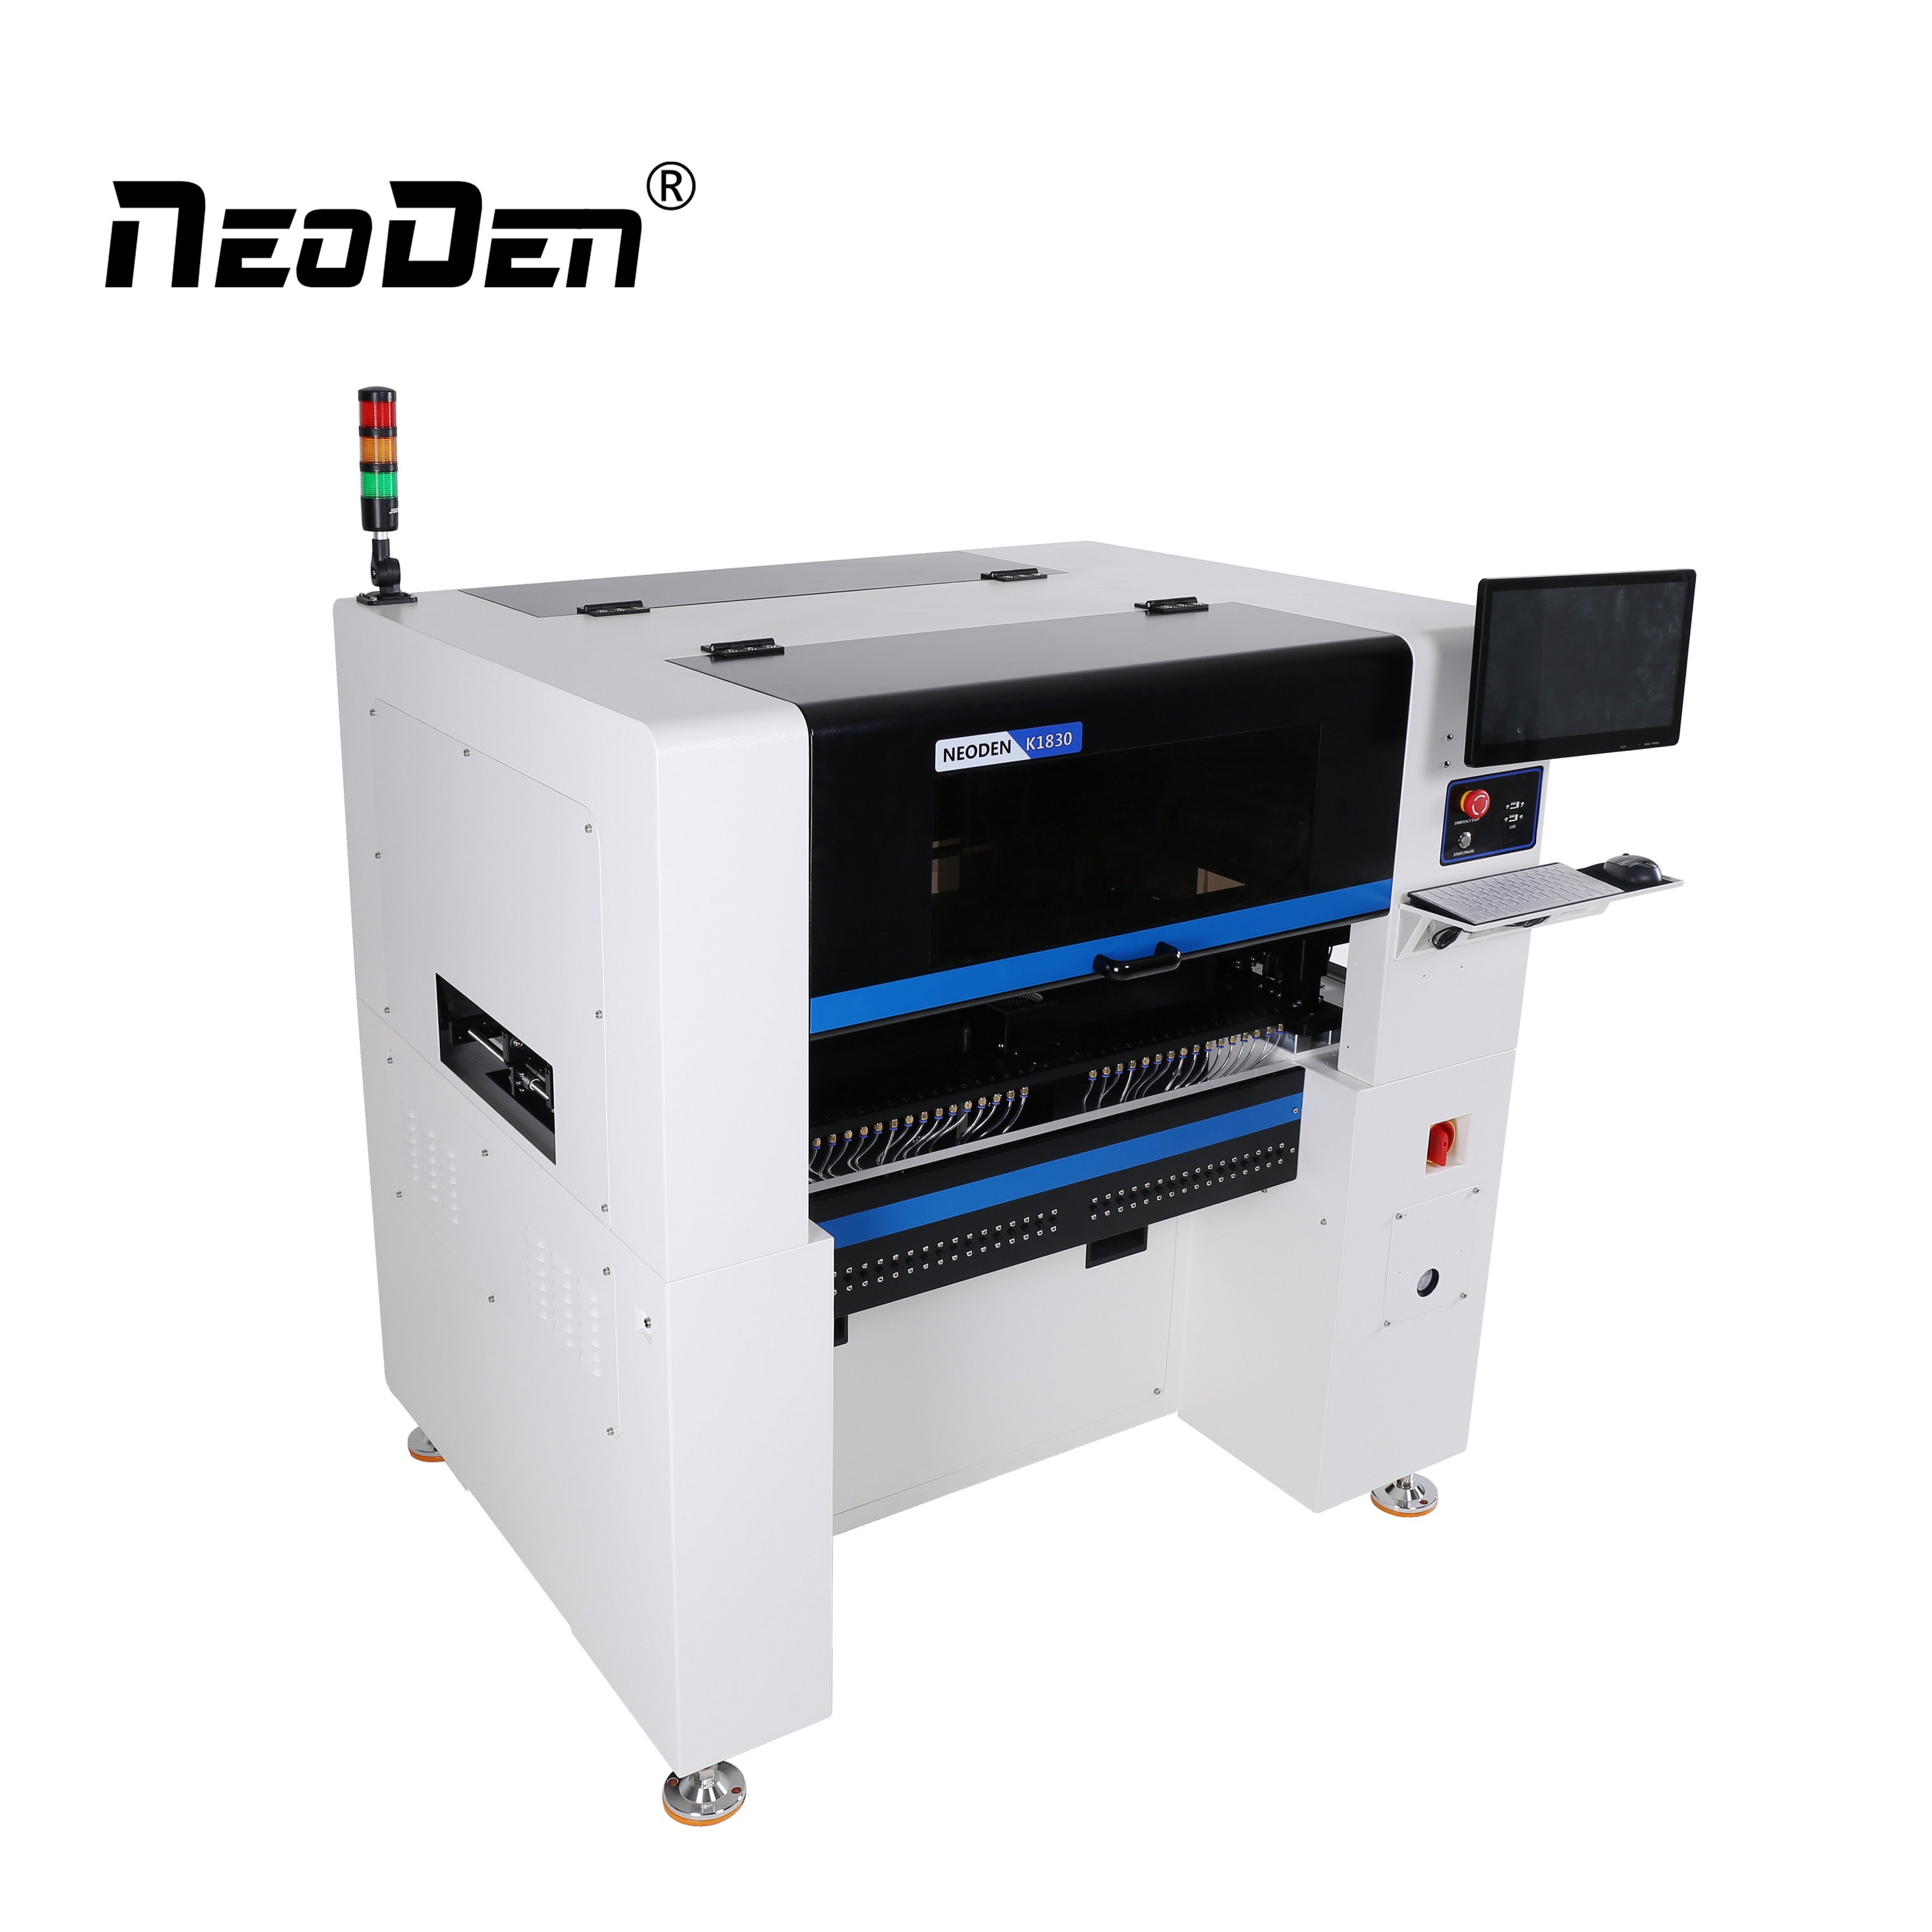 Wholesale Dealers of Pcb Production Machine - SMT pick and place NeoDen K1830 – Neoden